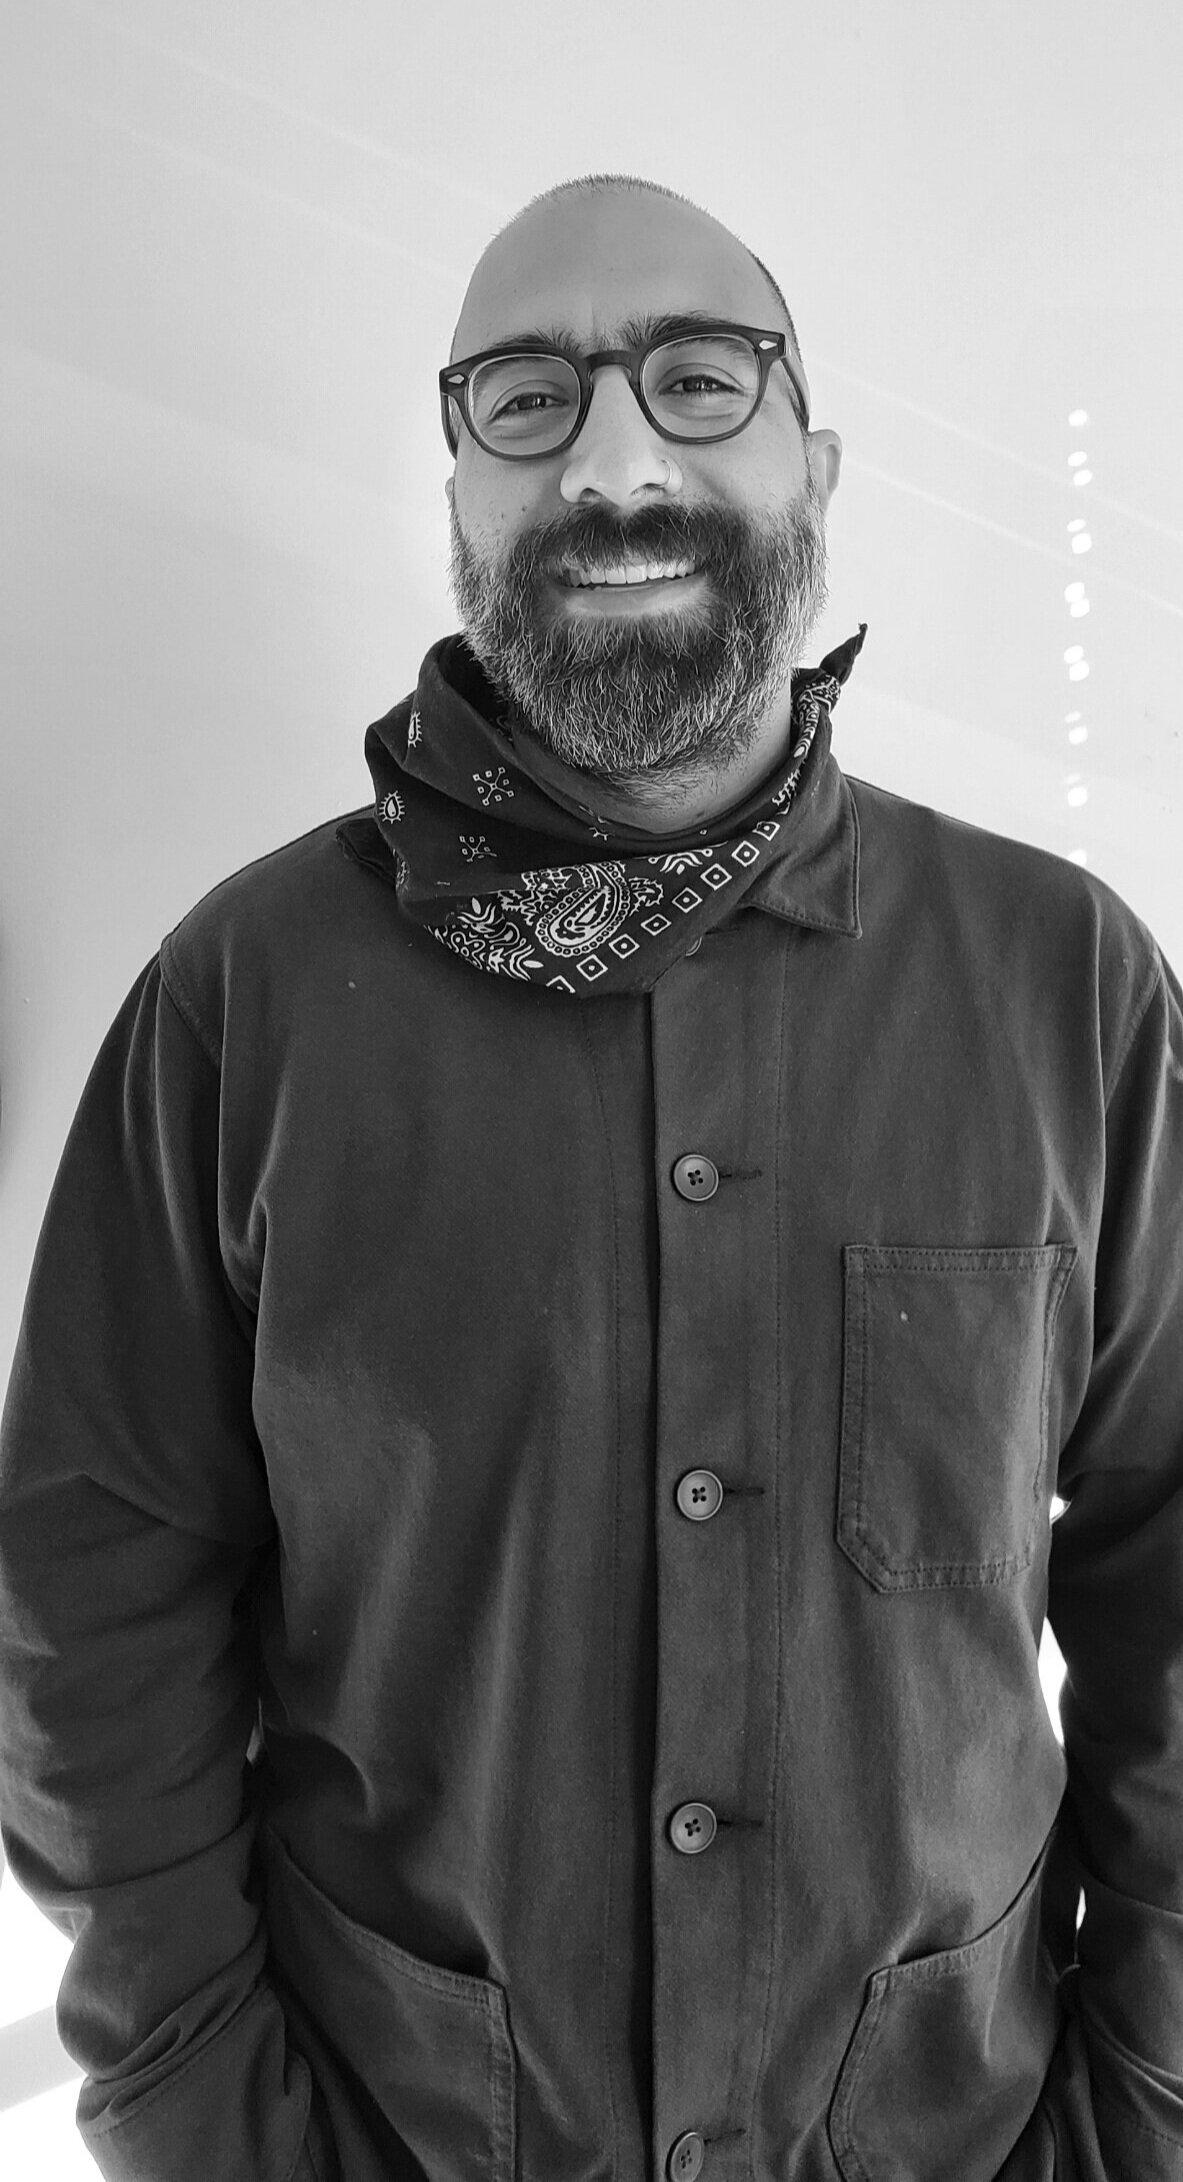 Black and white photo of a man with dark glasses, beard and a bald head with a dark shirt and bandana tied around his neck. 